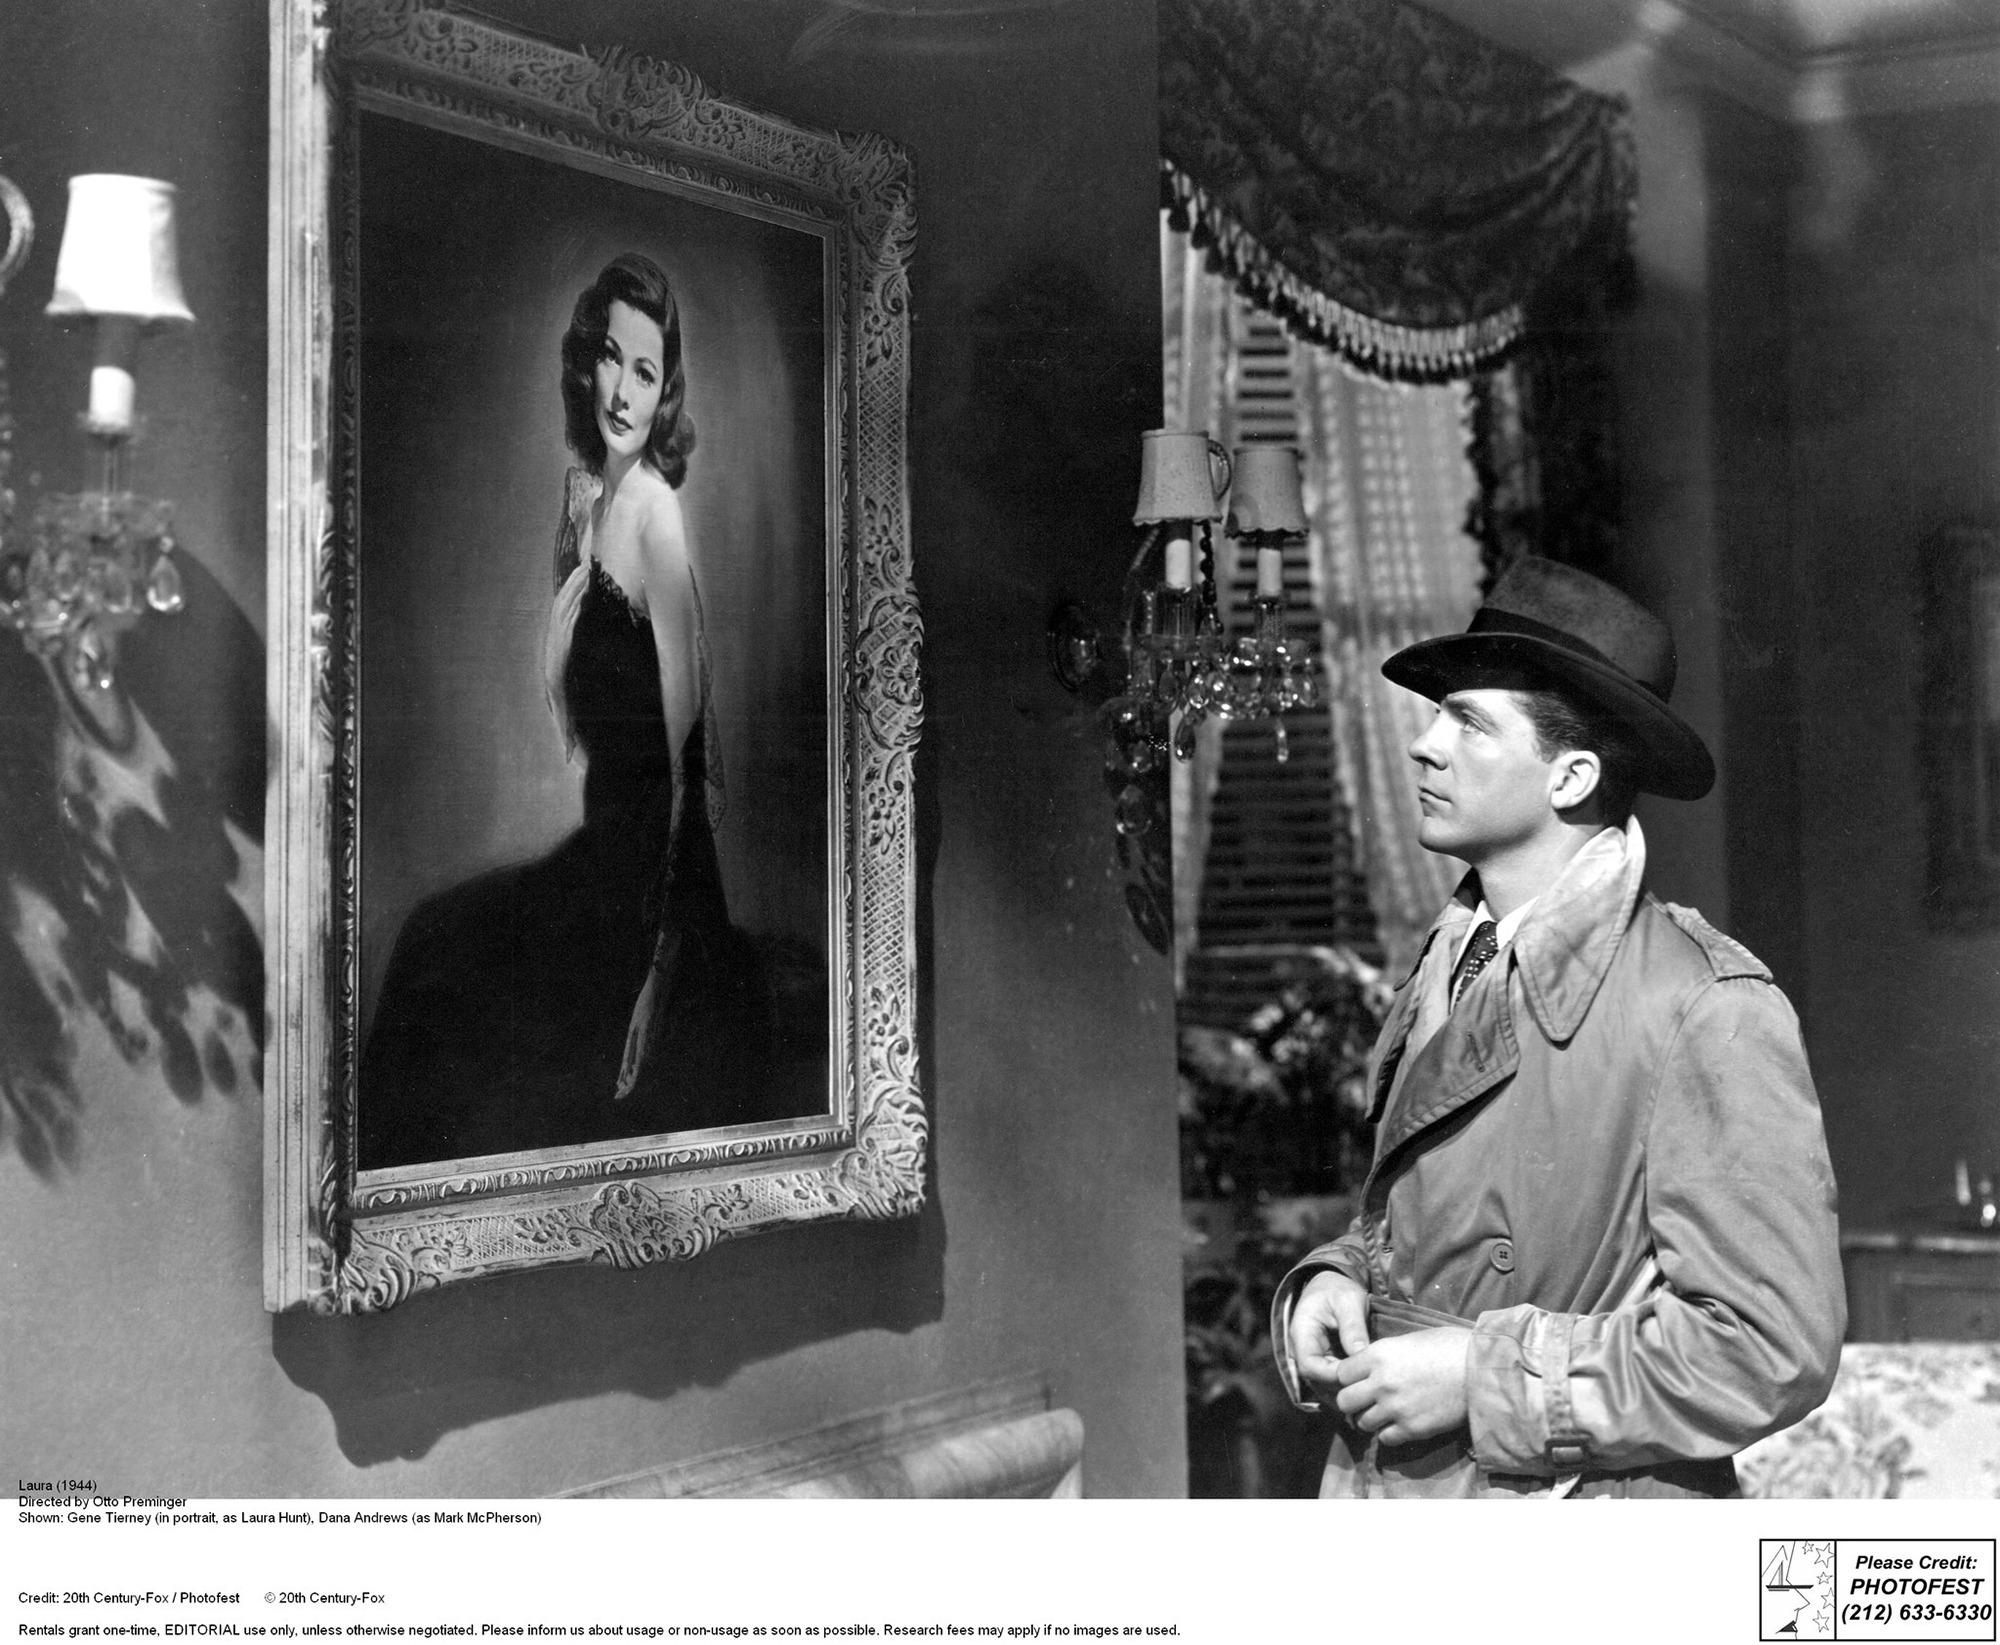 Who was she ... or is she? Dana Andrews contemplates the mystery of Laura in the 1944 film noir by Otto Preminger.